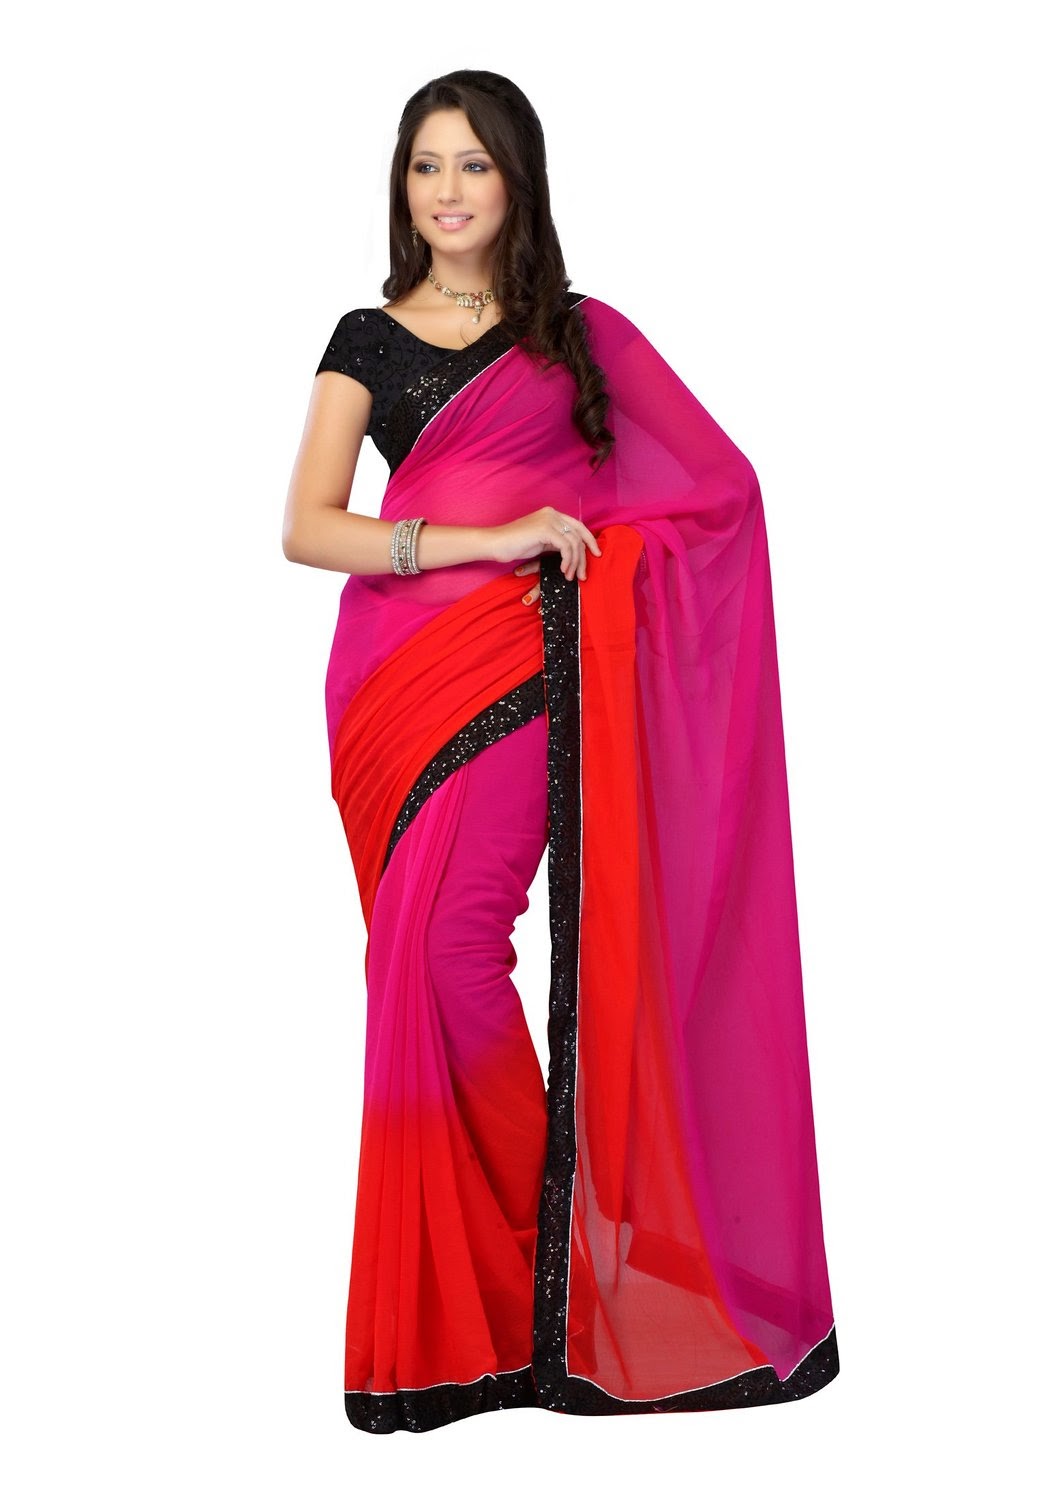 http://www.amazon.in/Fabdeal-bollywood-Designer-Chiffon-Embroidered/dp/B00LUPI5WY/